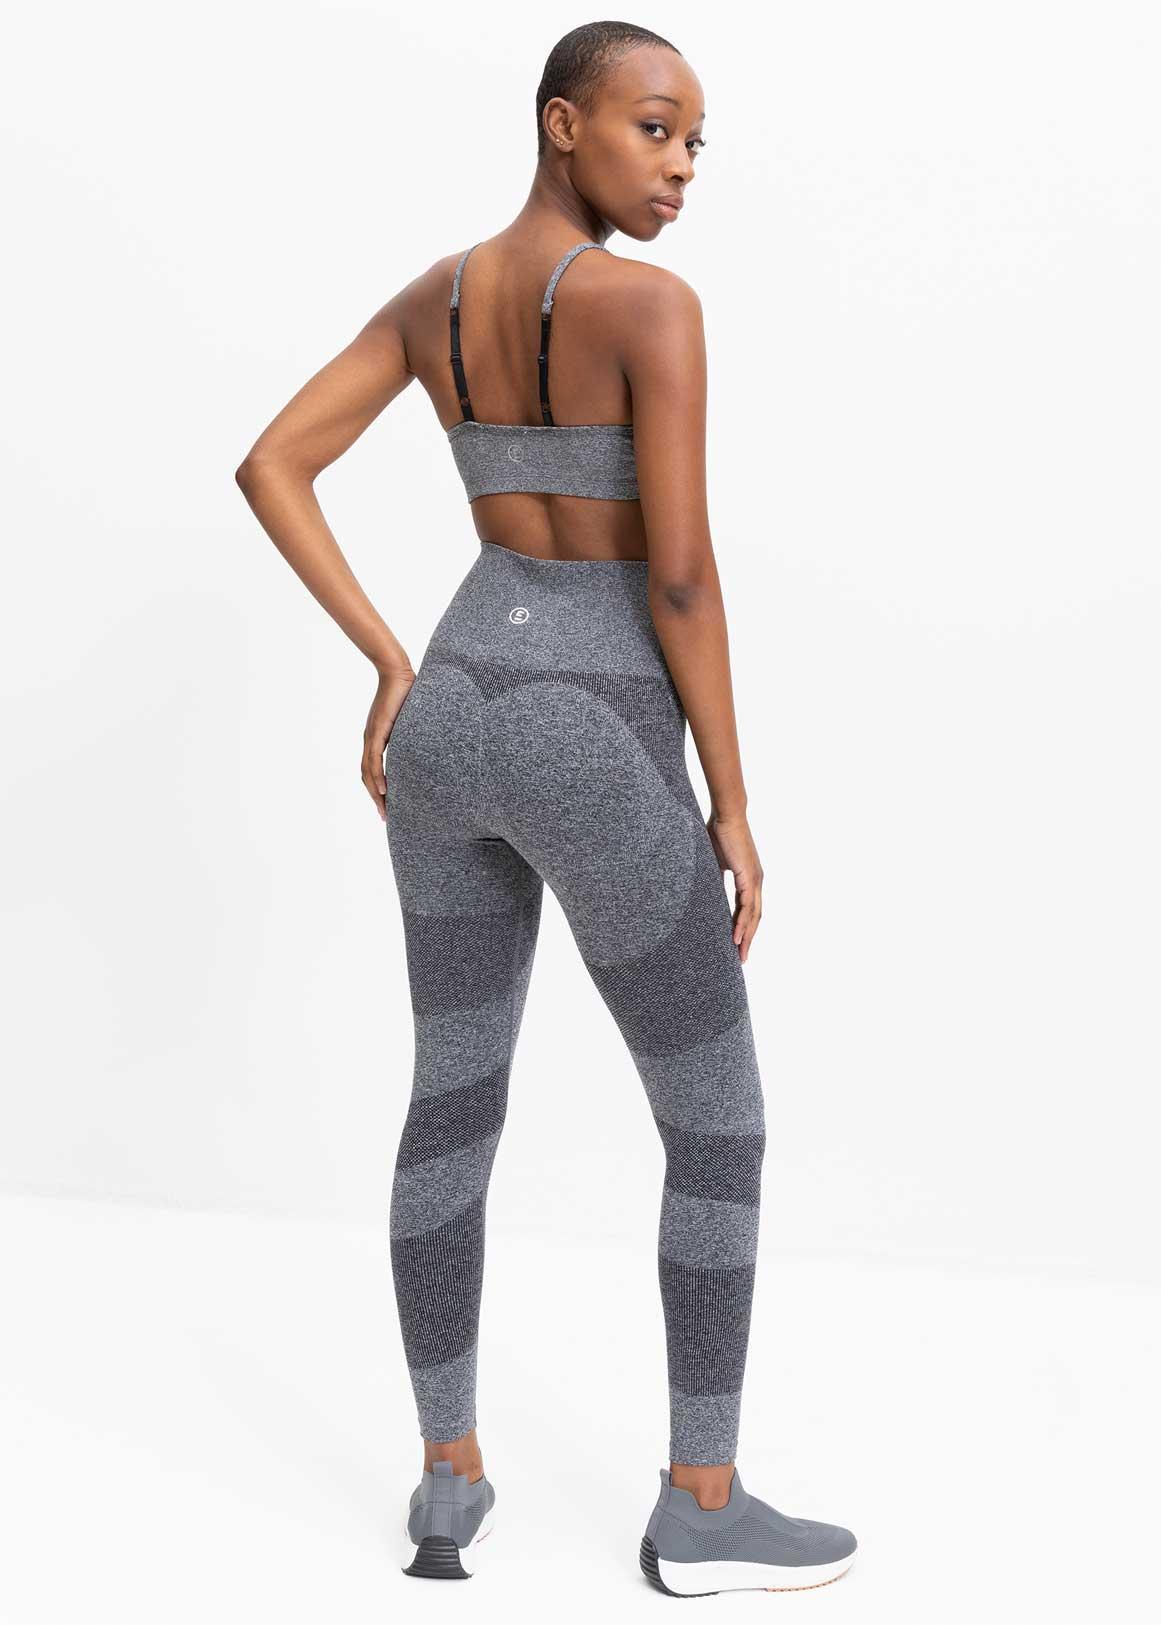 HIIT seamless bralet in textured charcoal